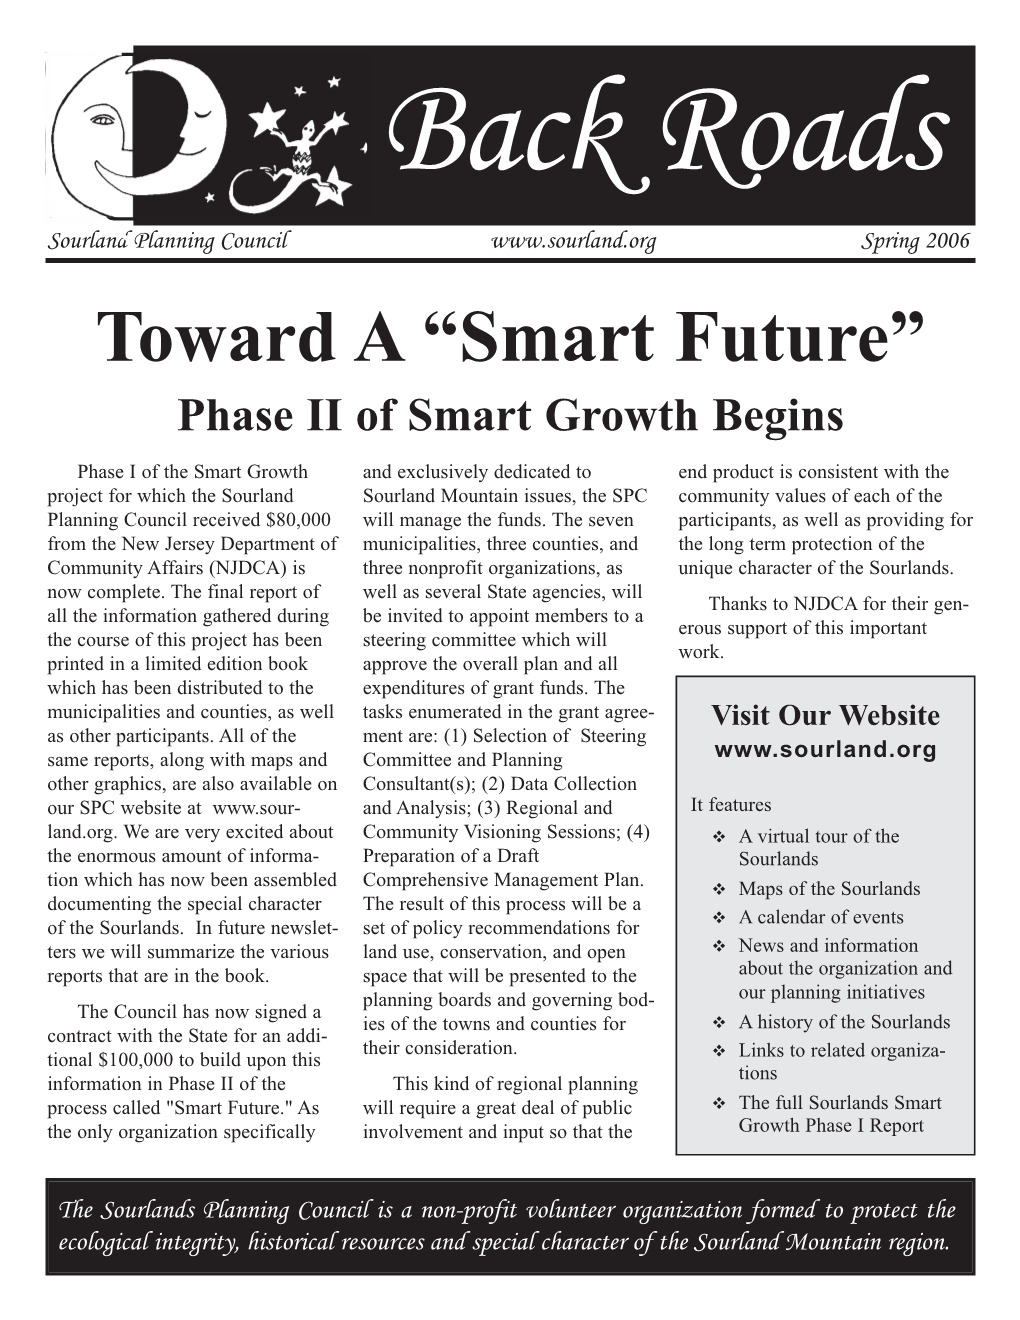 Sourland Planning Council Spring 2006 Toward a “Smart Future” Phase II of Smart Growth Begins